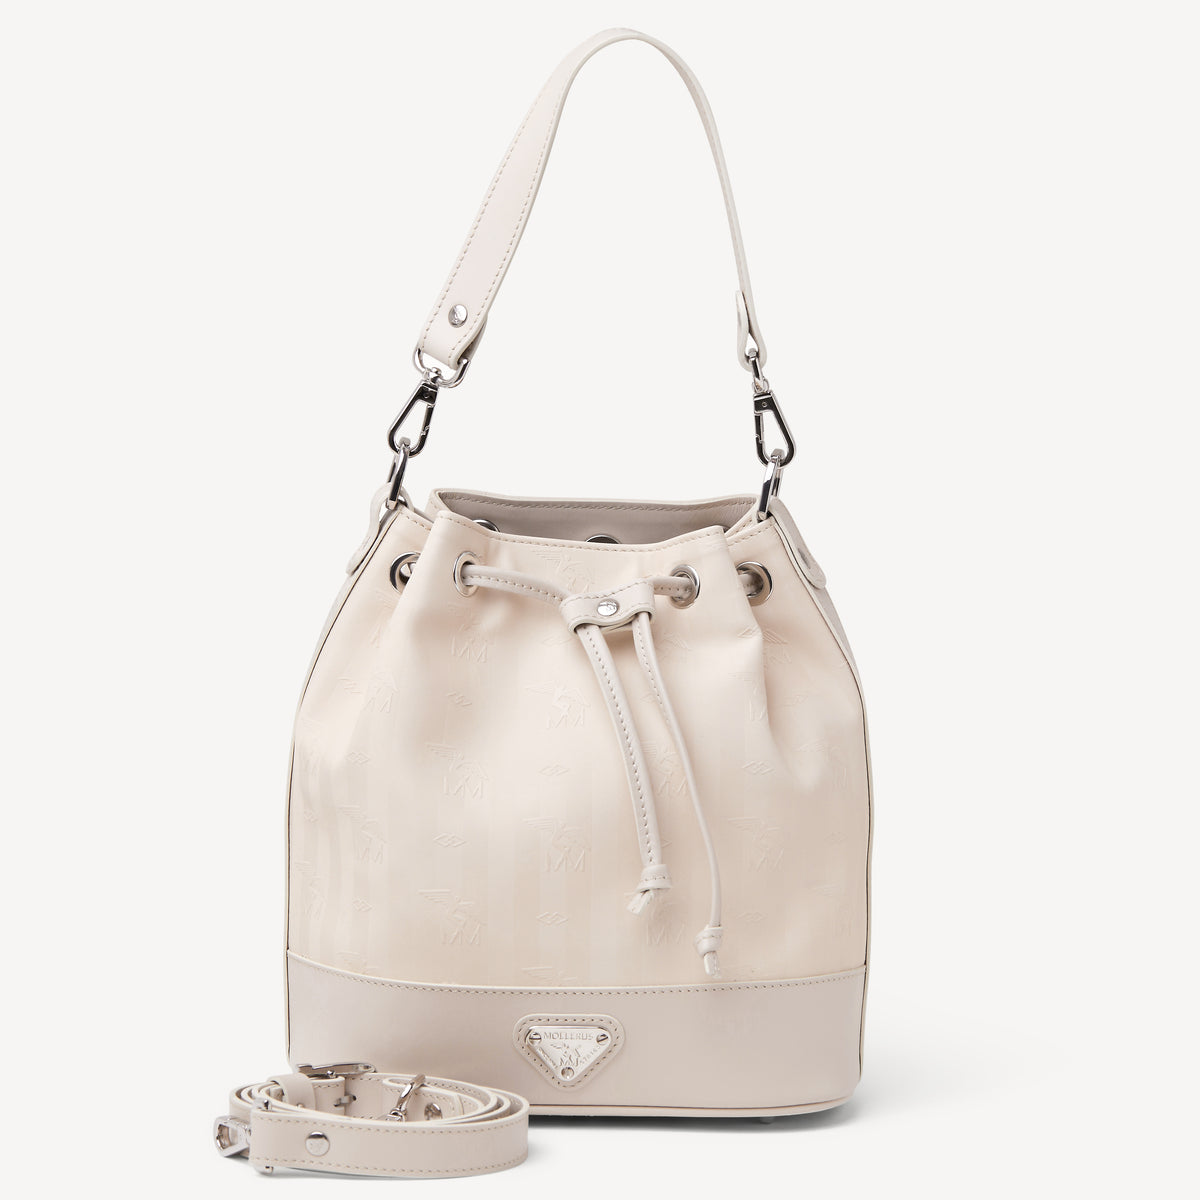 SION | Beuteltasche pearl weiss/silber - FRONTAL